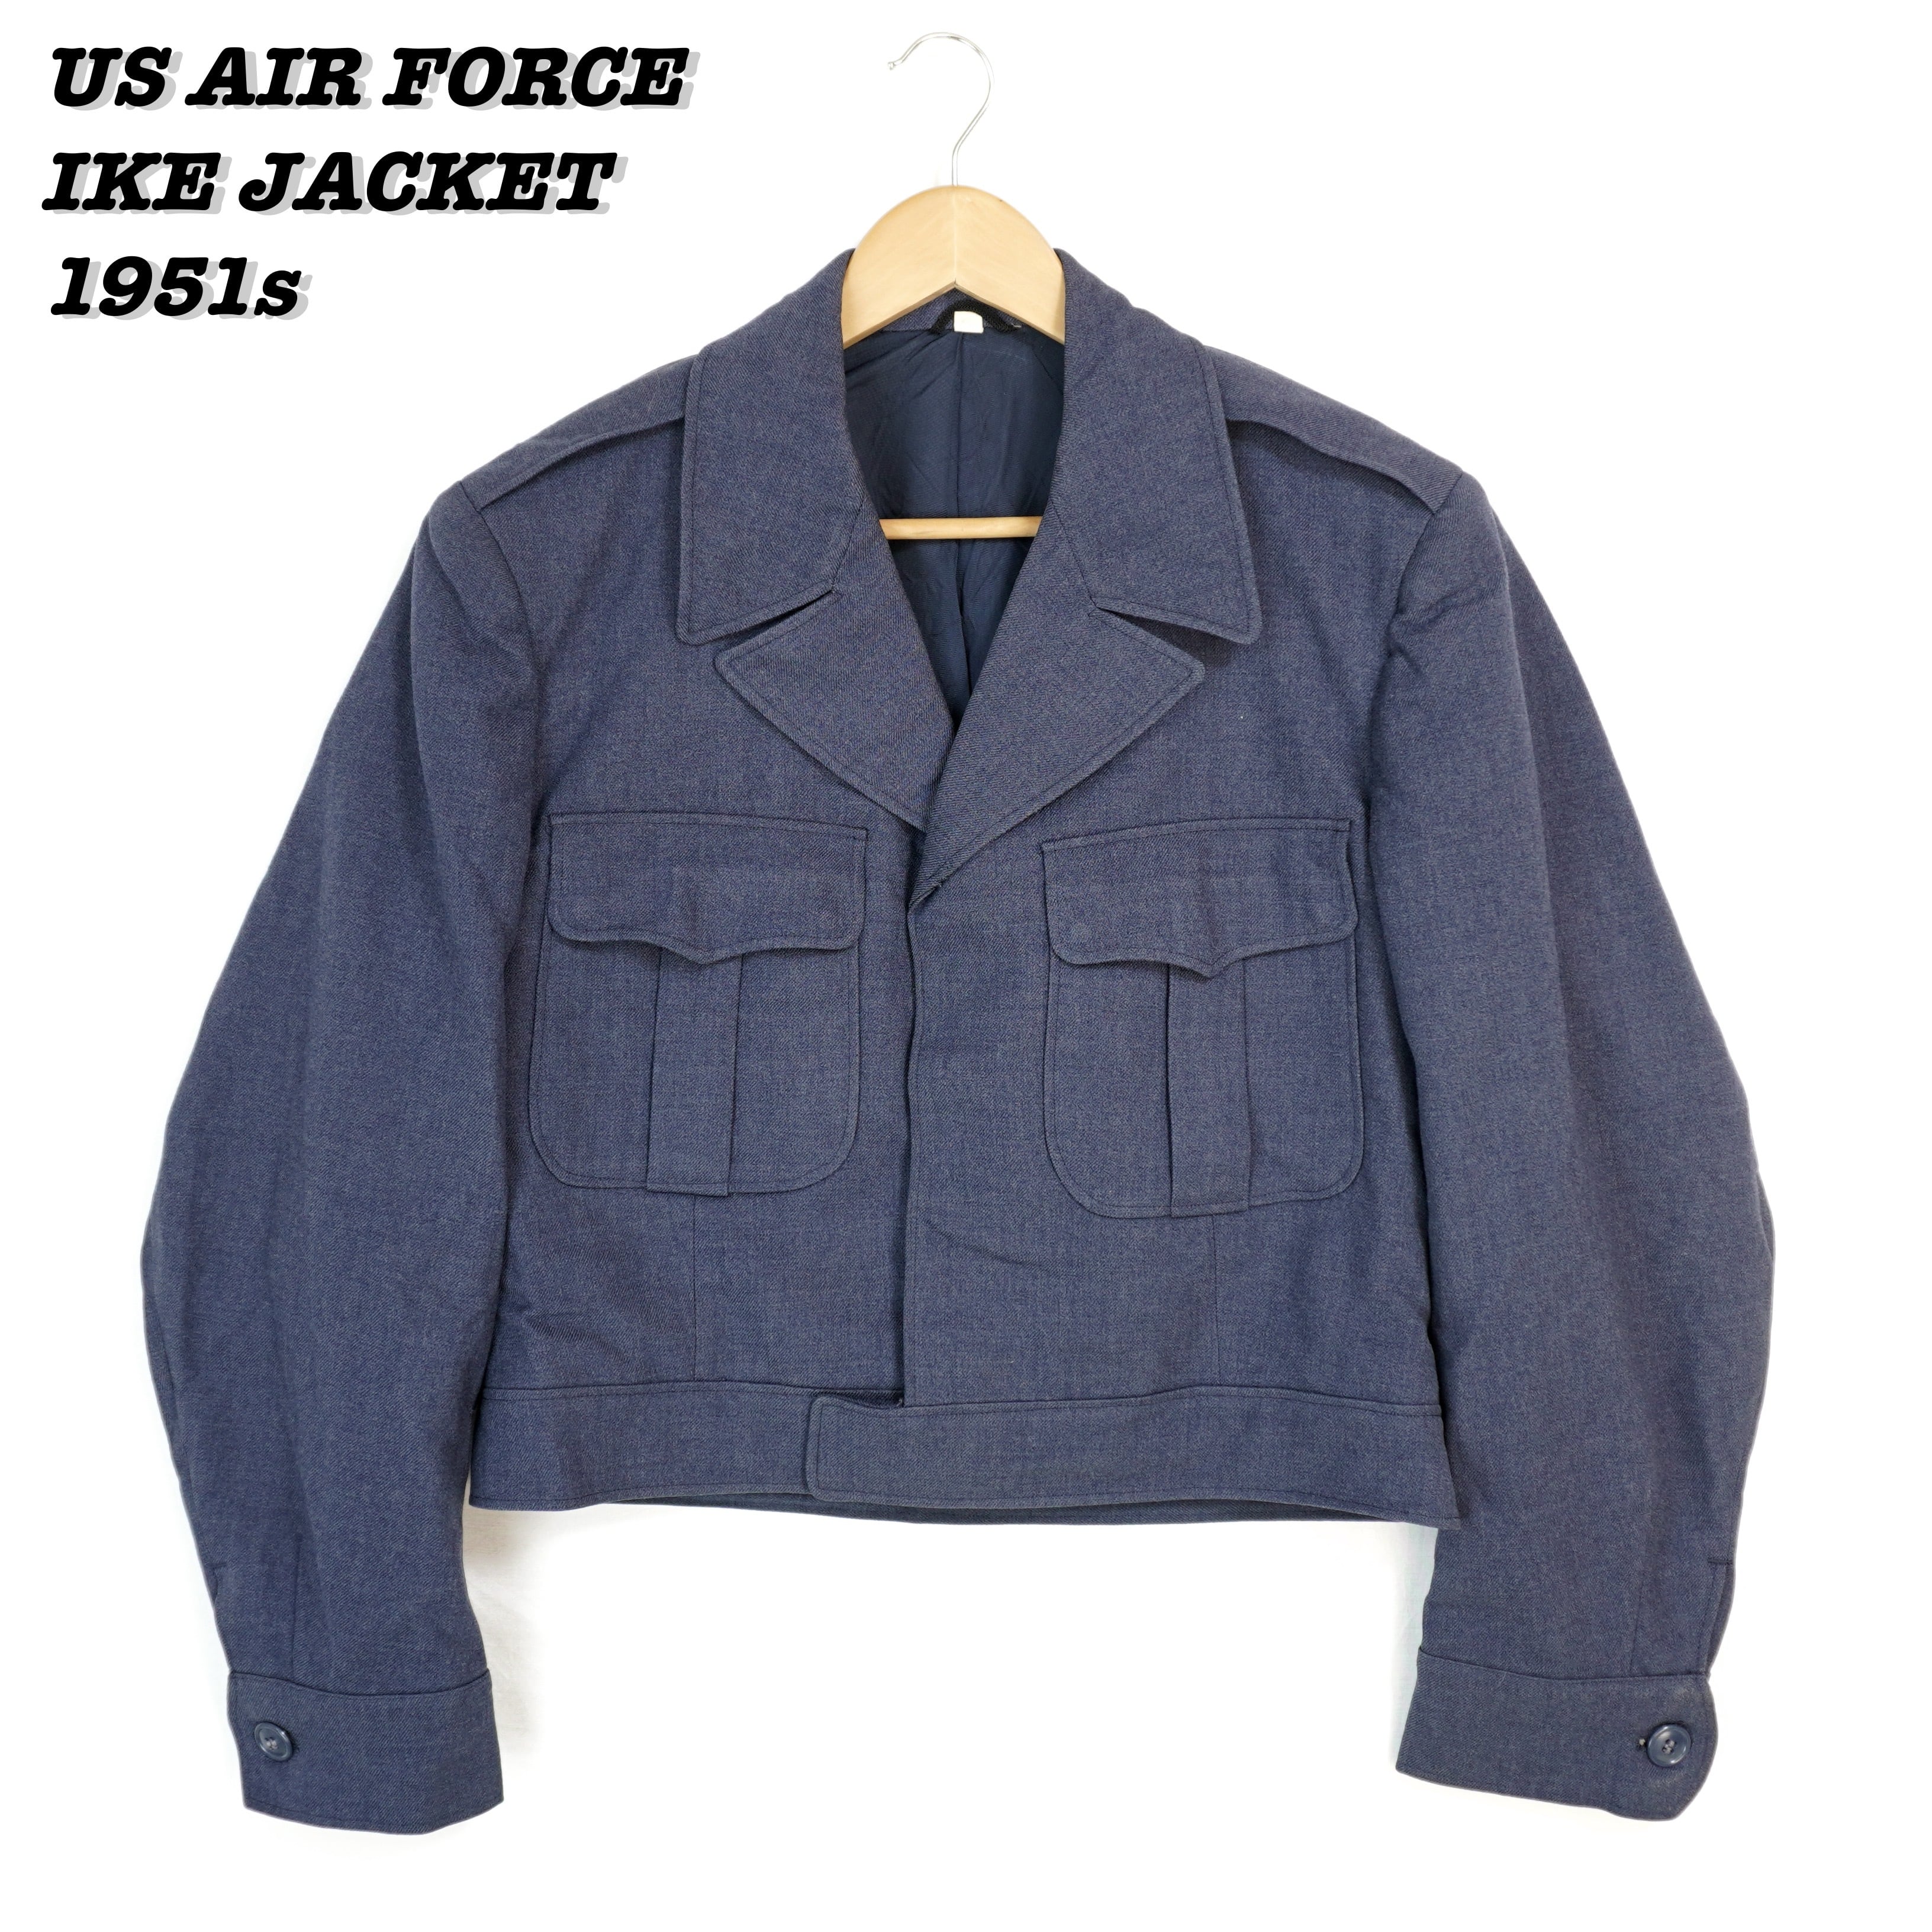 US AIR FORCE M-1950 IKE JACKET 1951s 40R